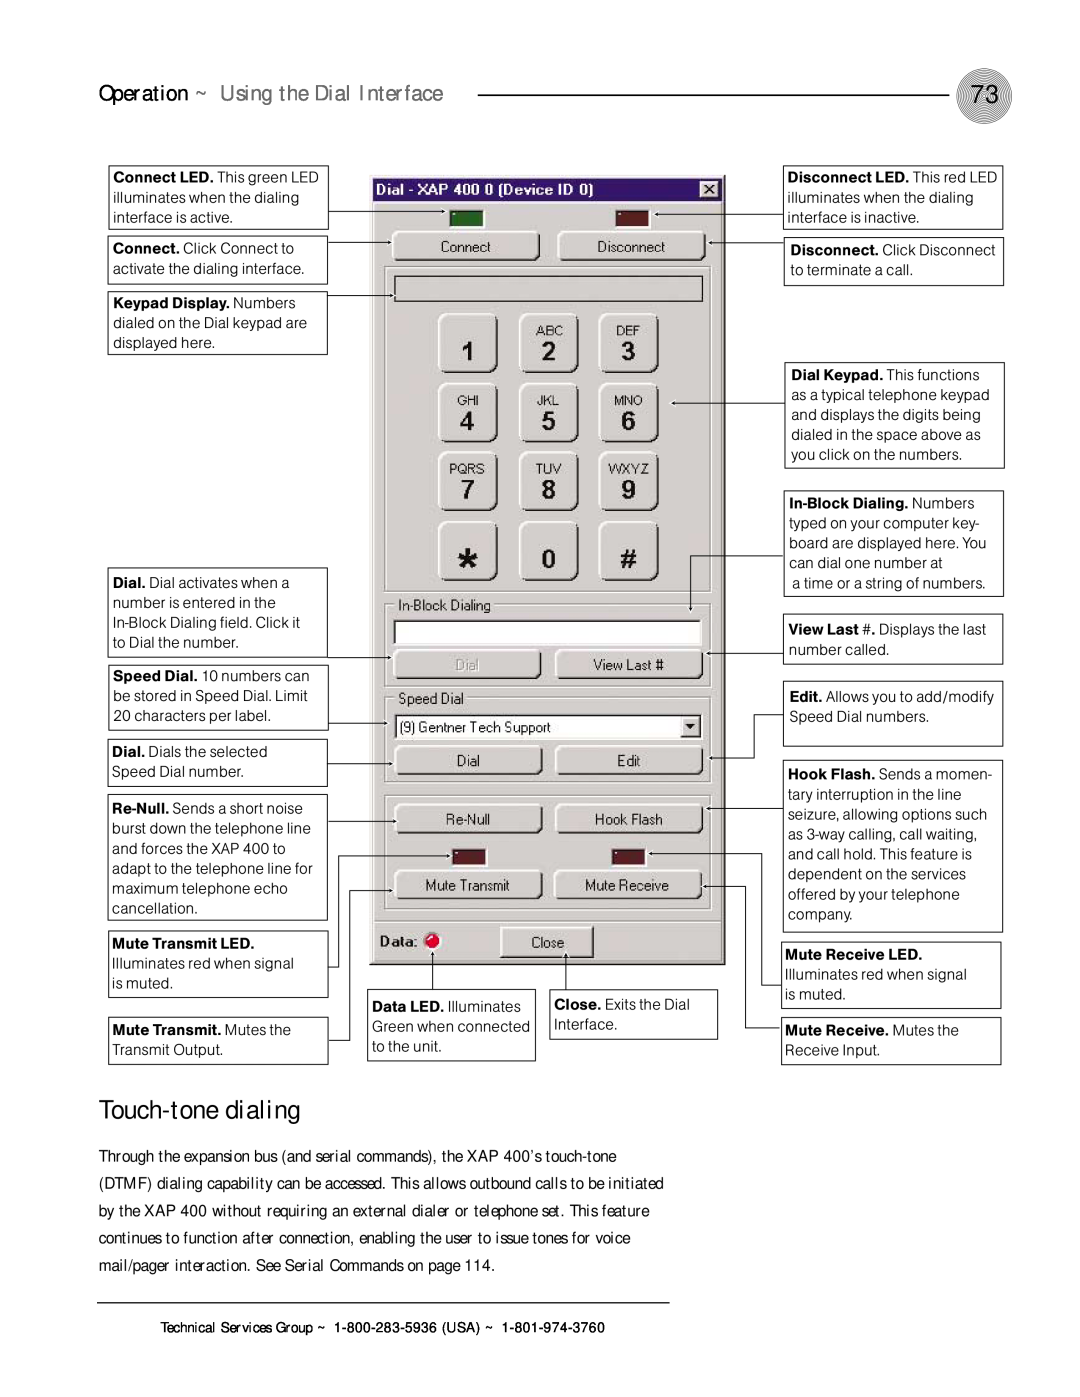 ClearOne comm XAP 400 operation manual Touch-tonedialing, Operation ~ Using the Dial Interface 